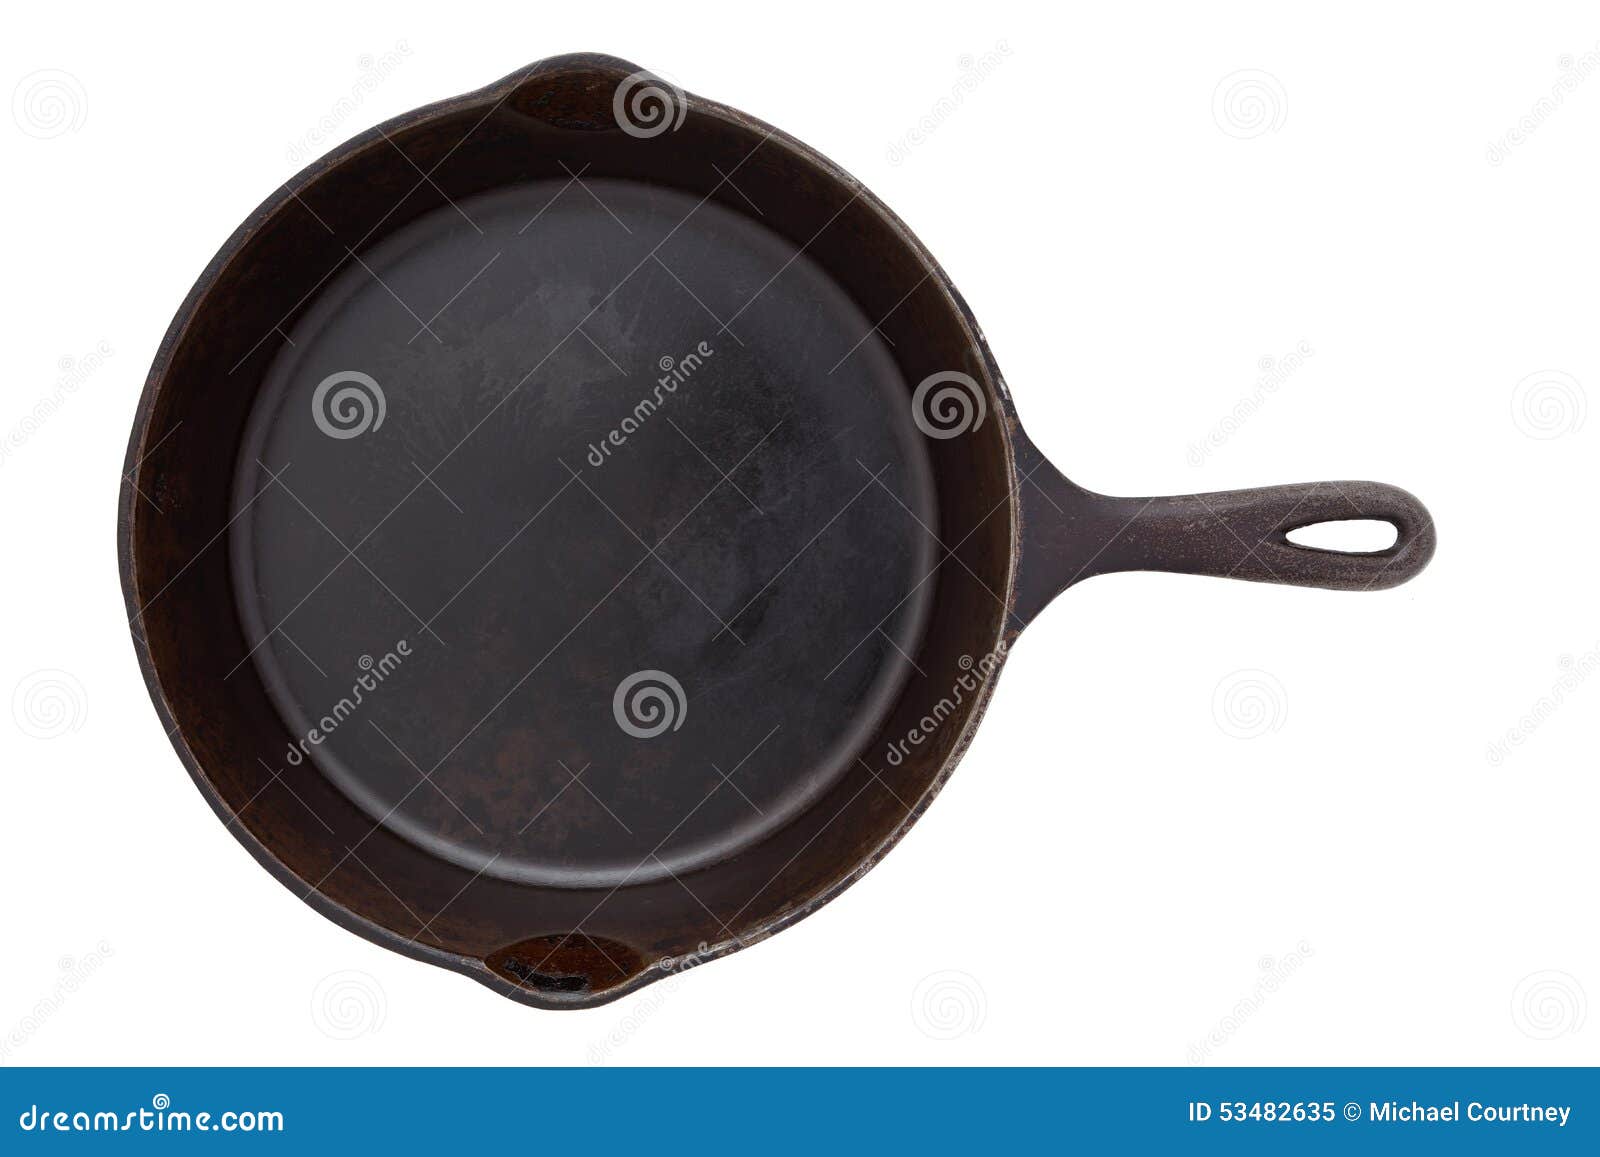 cast iron frying pan  on white